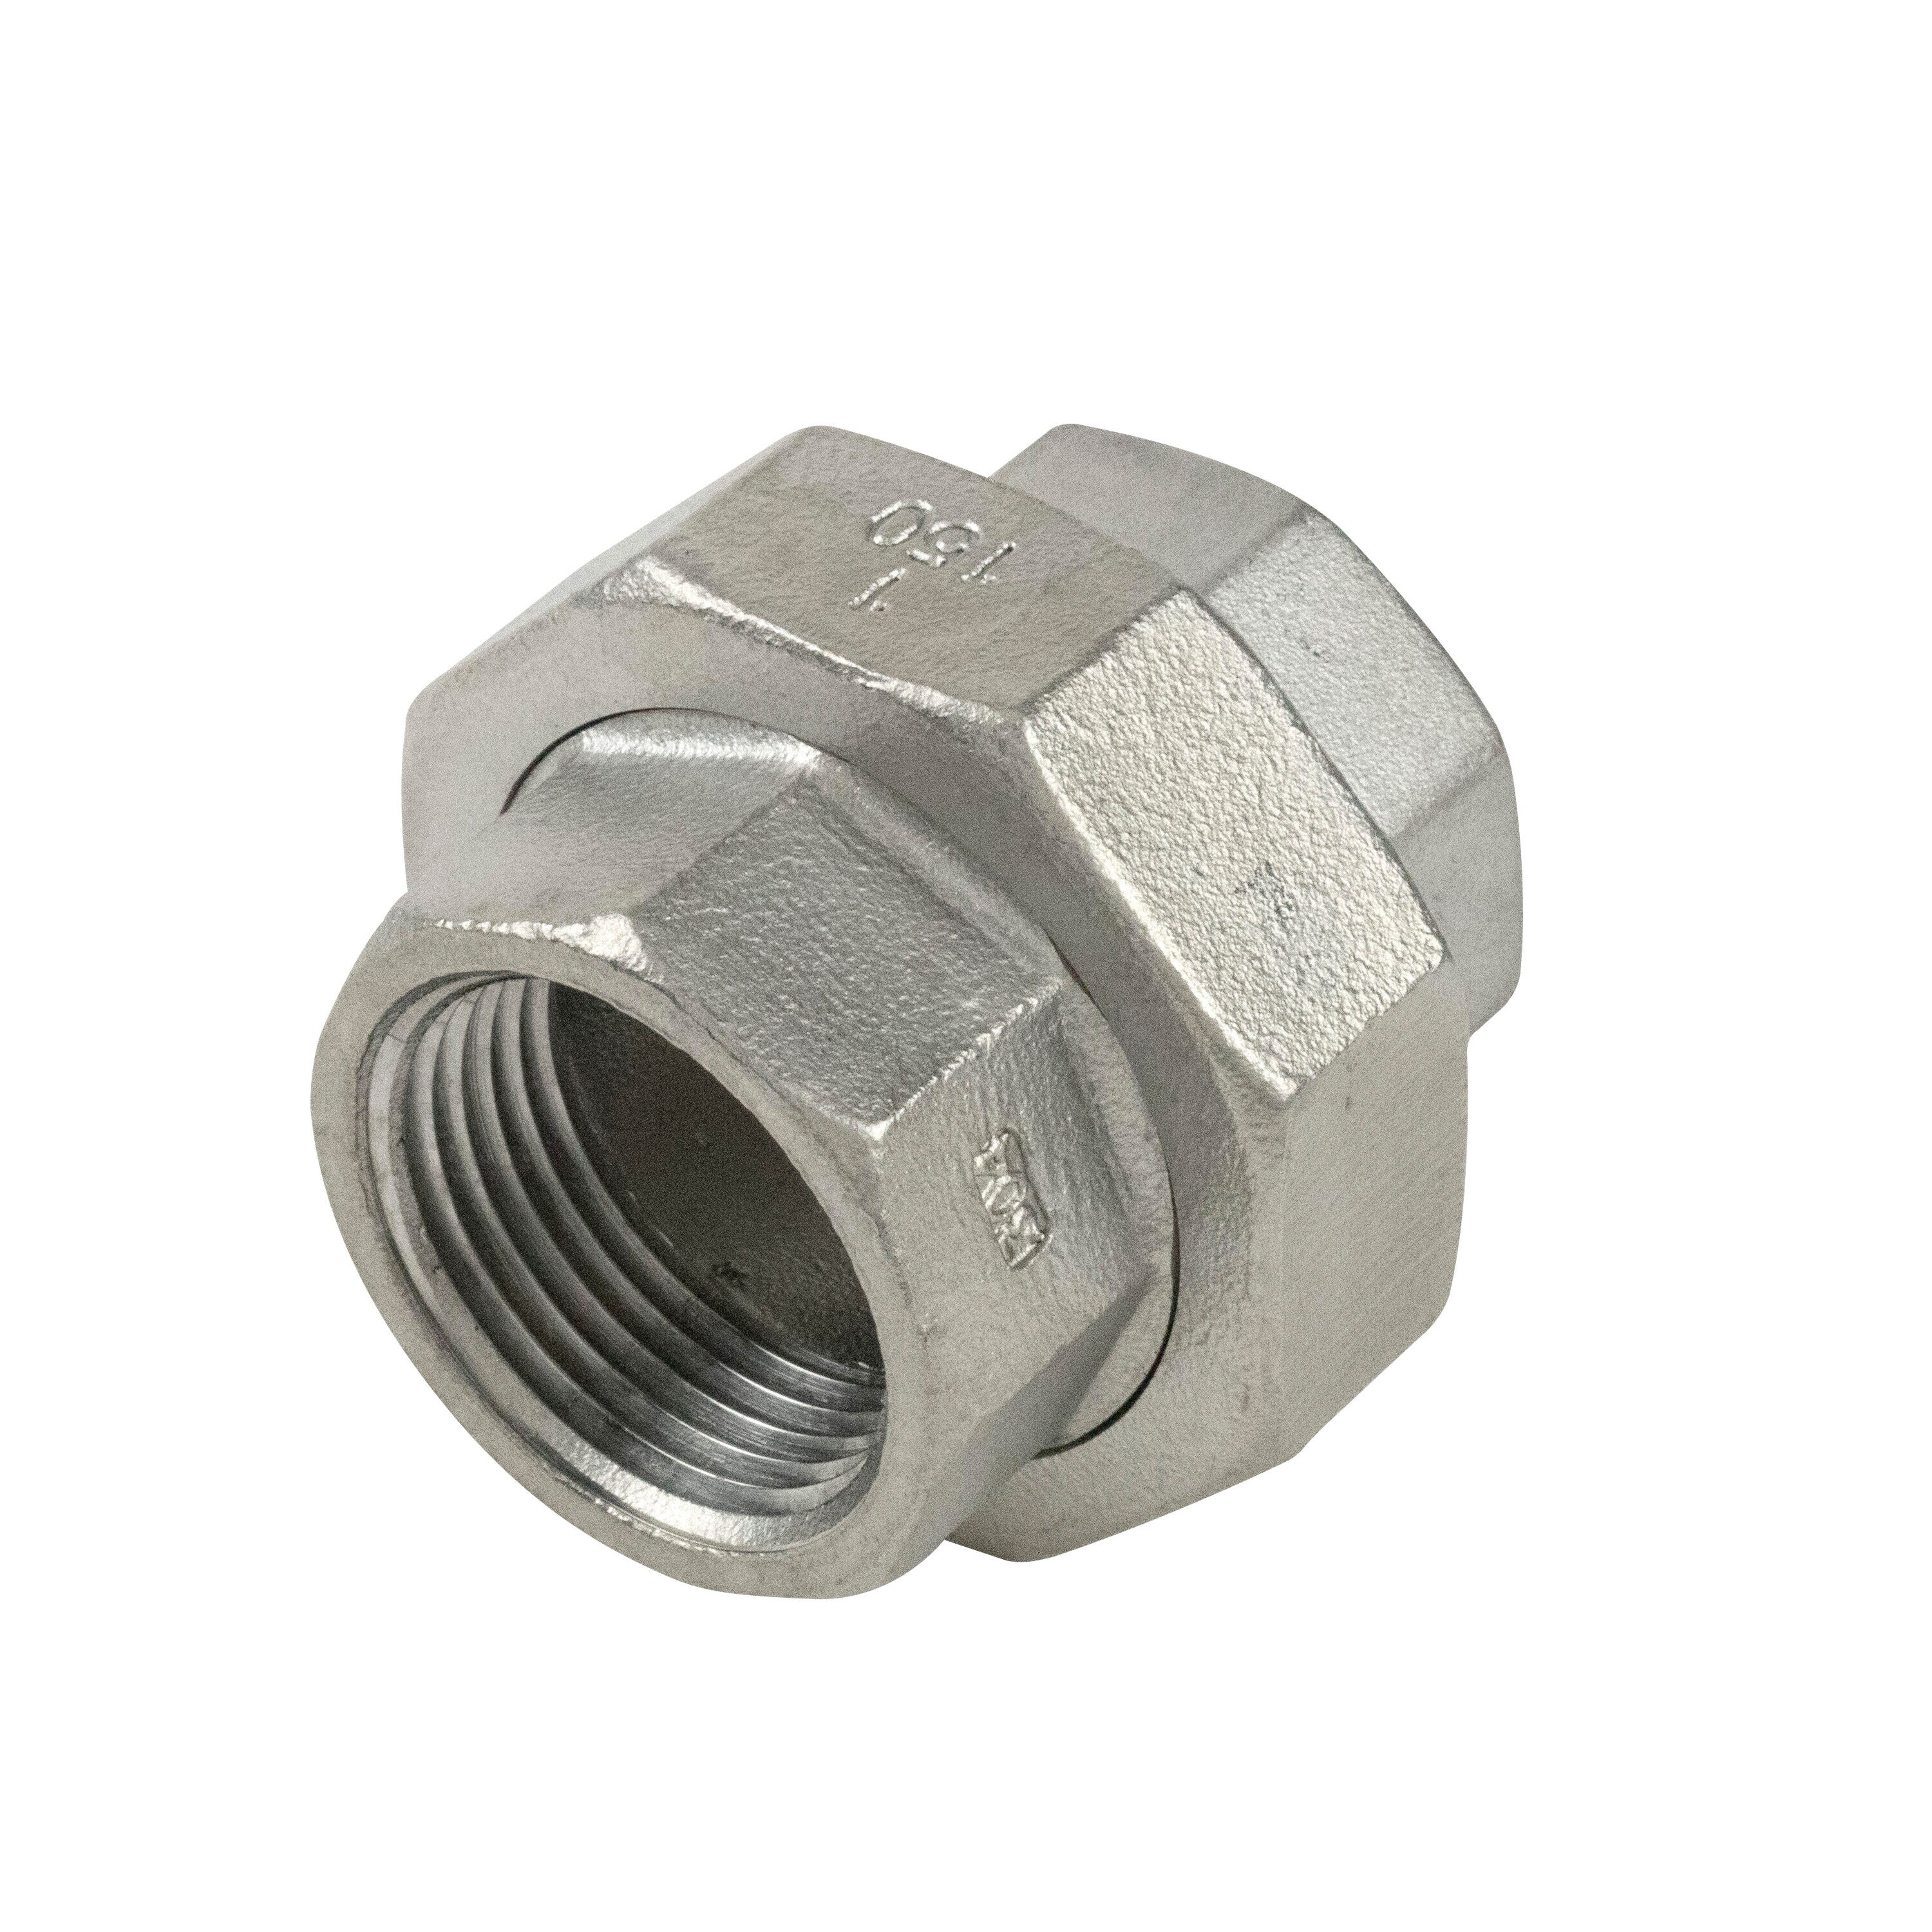 Proline Series 1/2-in x 1/2-in Compression Coupling Union Fitting